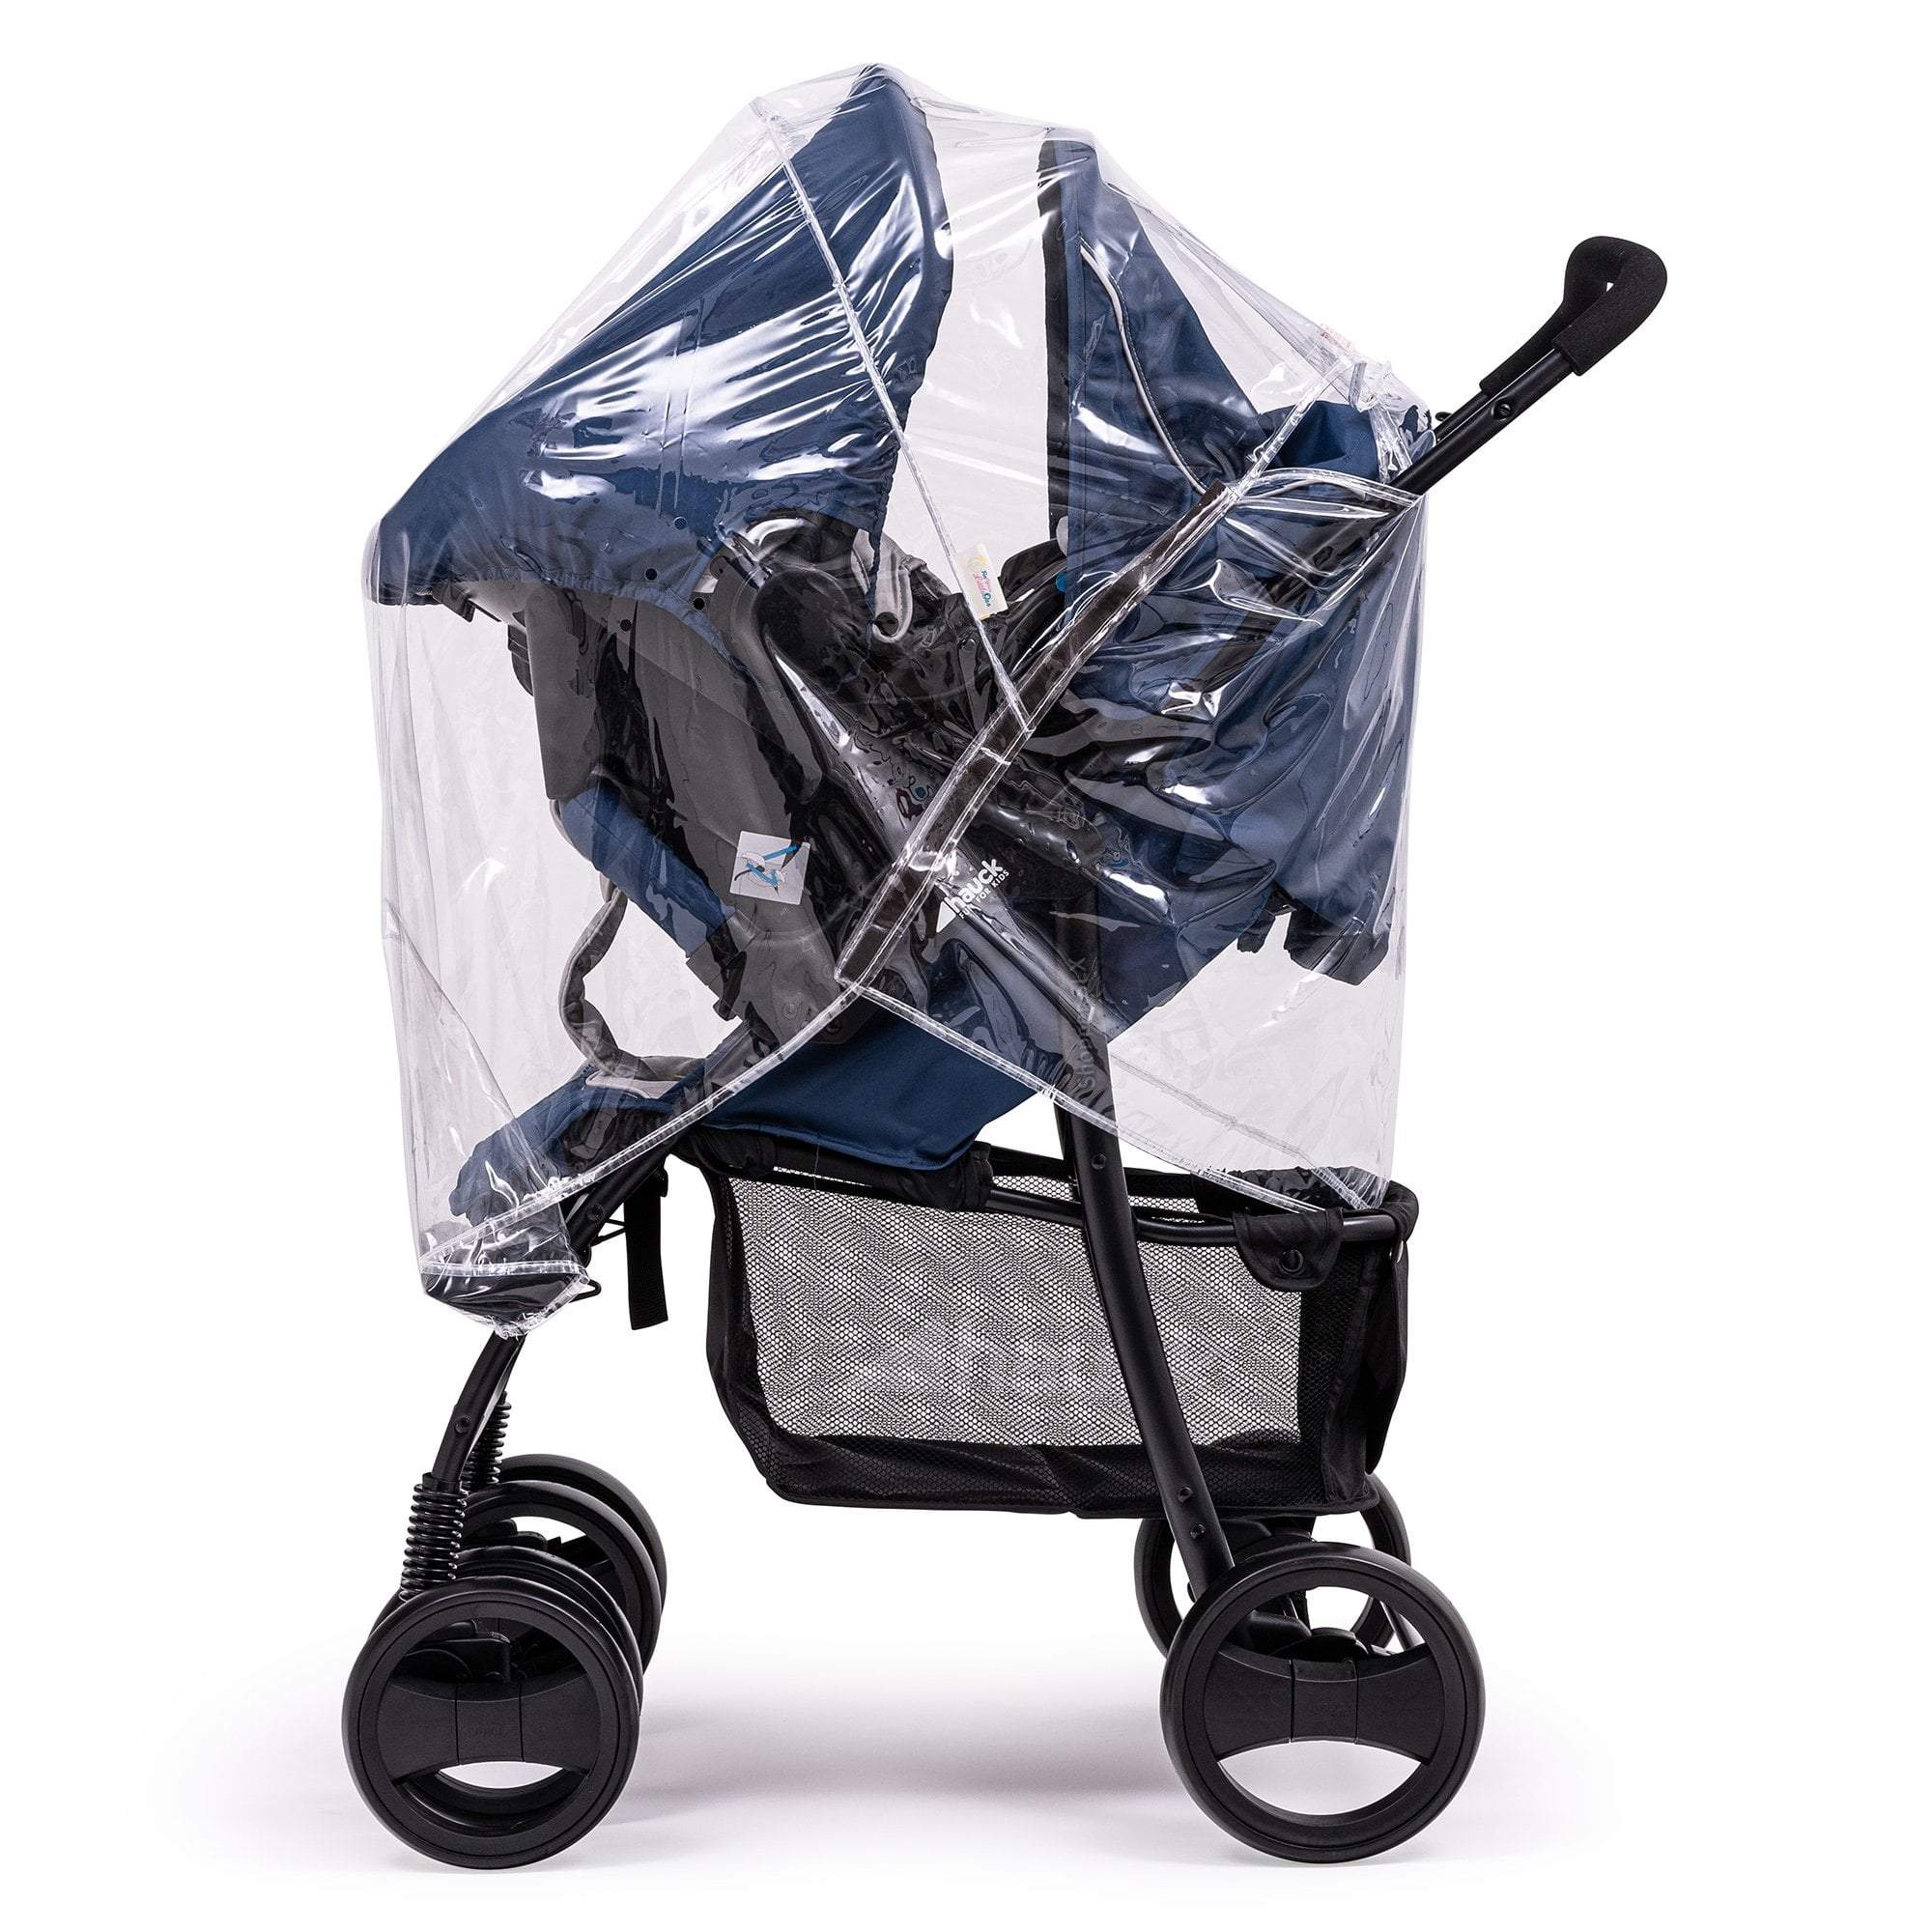 Travel System Raincover Compatible with Chicco - Fits All Models - For Your Little One